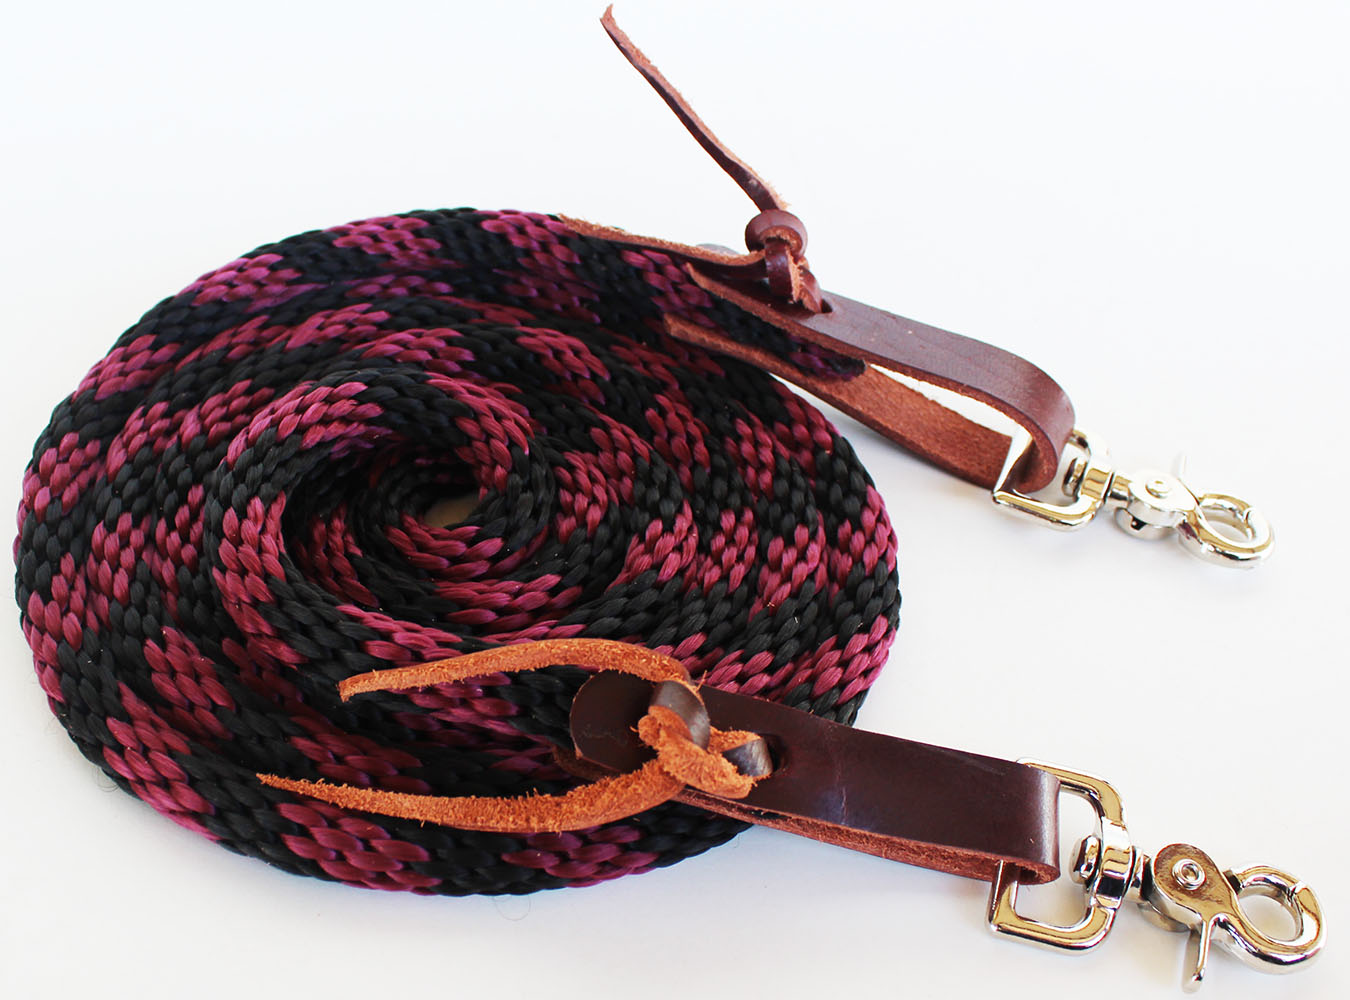 Horse Tack Roping Competition Rein Knotted Nylon 7' Braided Western Barrel 